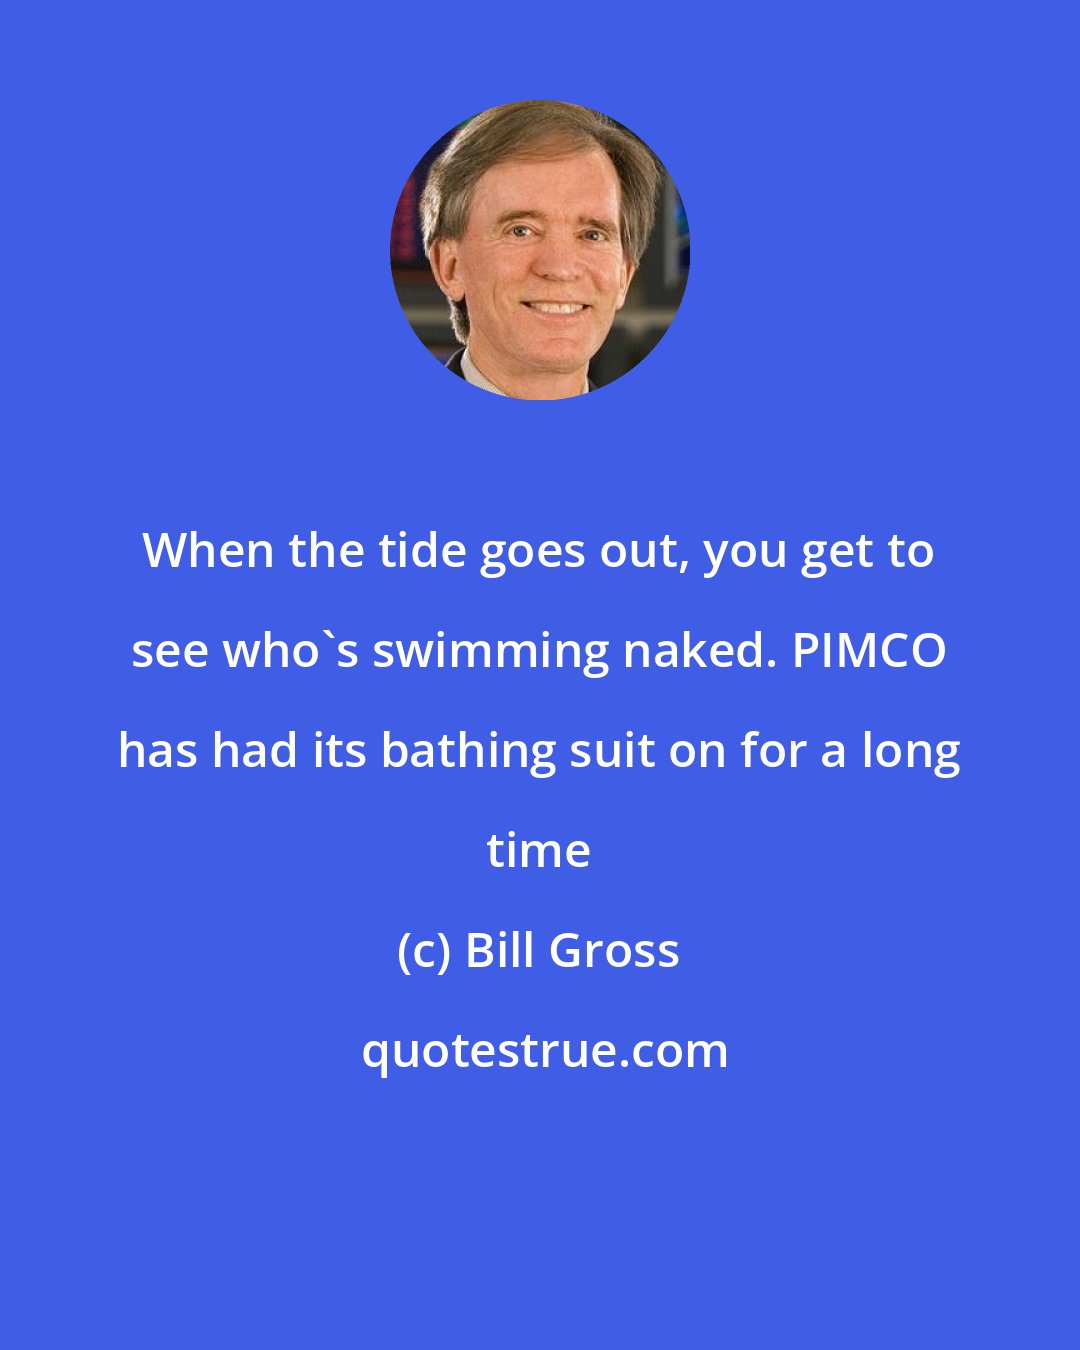 Bill Gross: When the tide goes out, you get to see who's swimming naked. PIMCO has had its bathing suit on for a long time